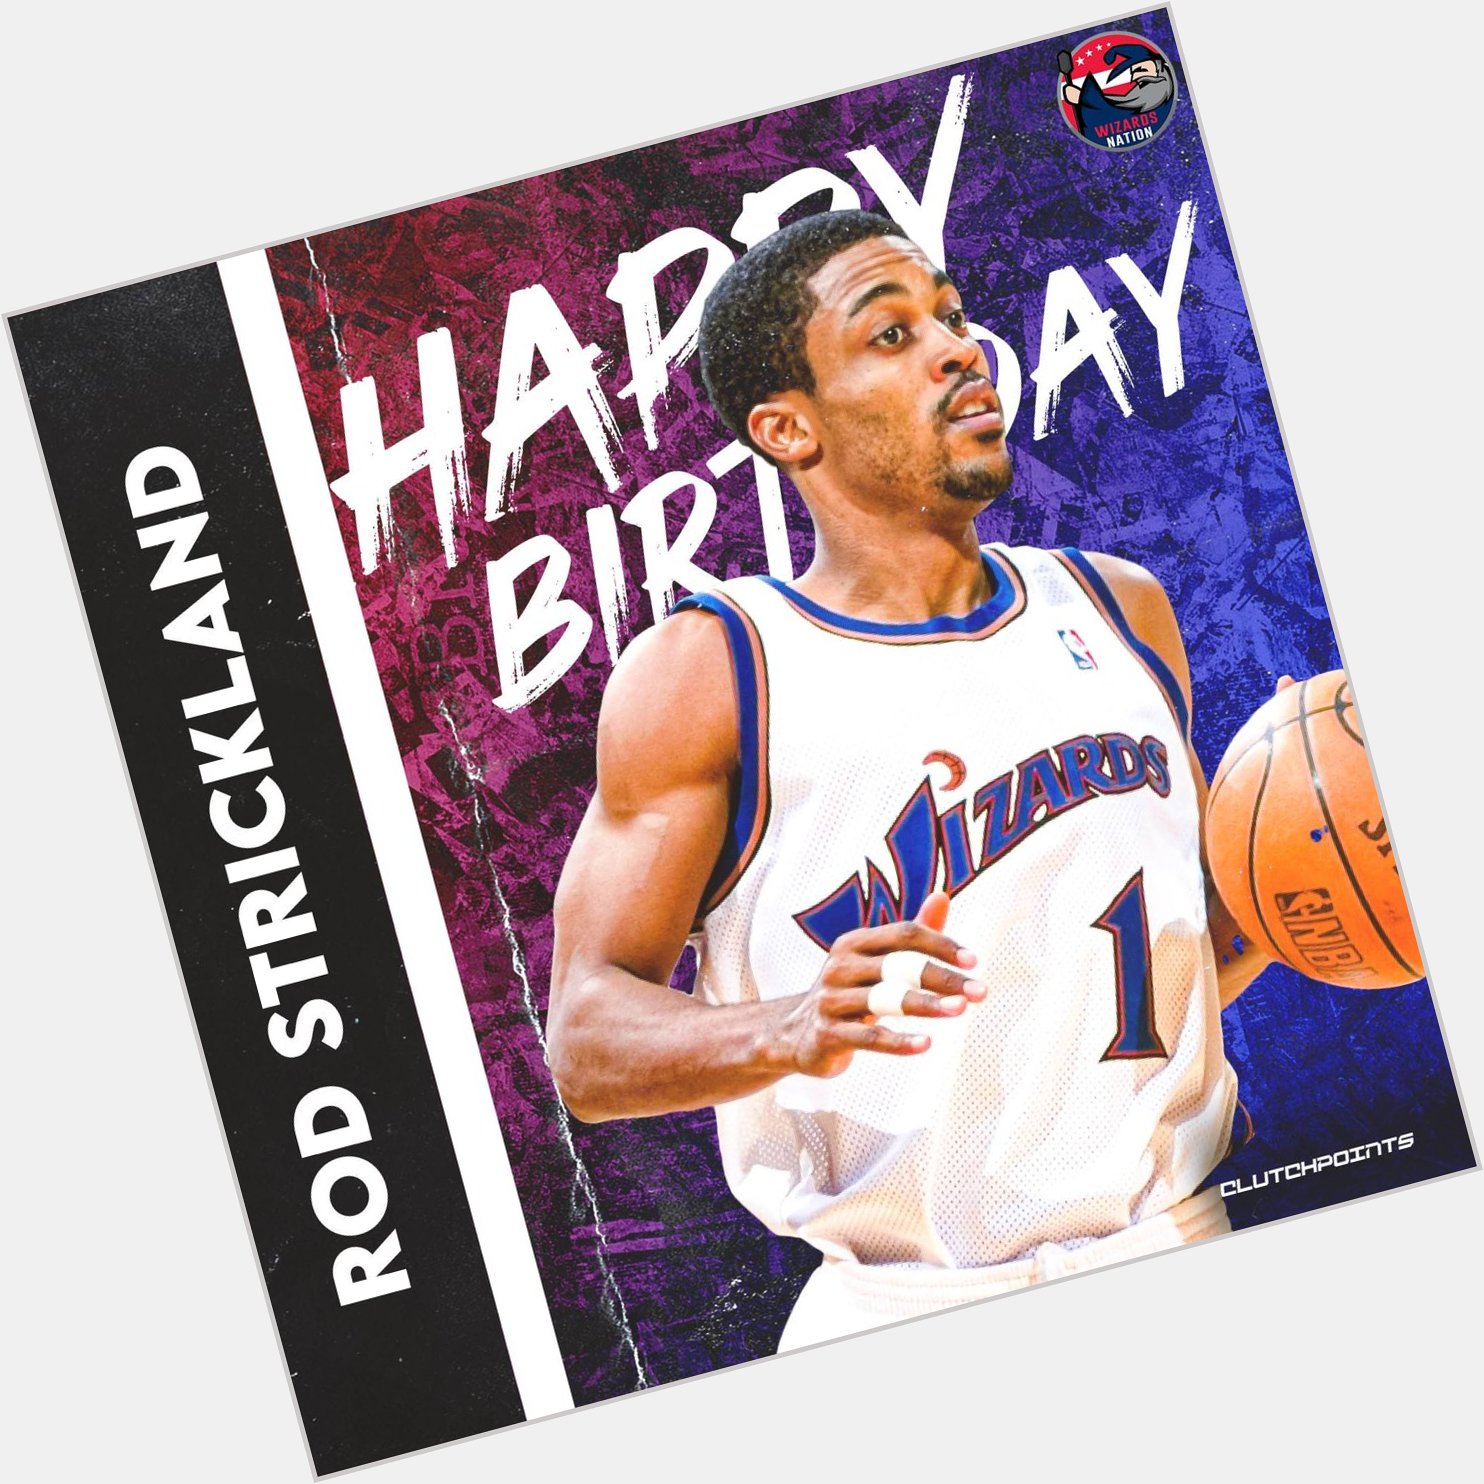 Wizards Nation, join us in wishing Rod Strickland a happy birthday!

The real OG of the Jelly 